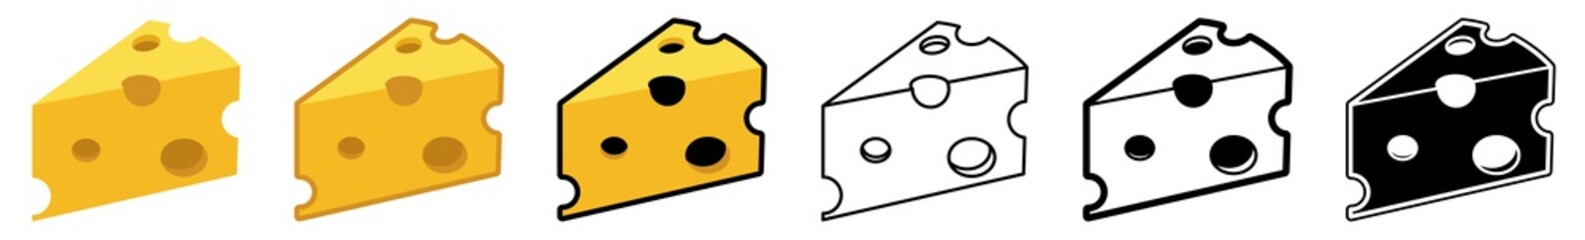 Cheese Icon Swiss Cheese Emmental Set | Cheeses Icon Piece Vector Illustration Logo | Cheese Hole Yellow Cheese Icon Isolated Collection